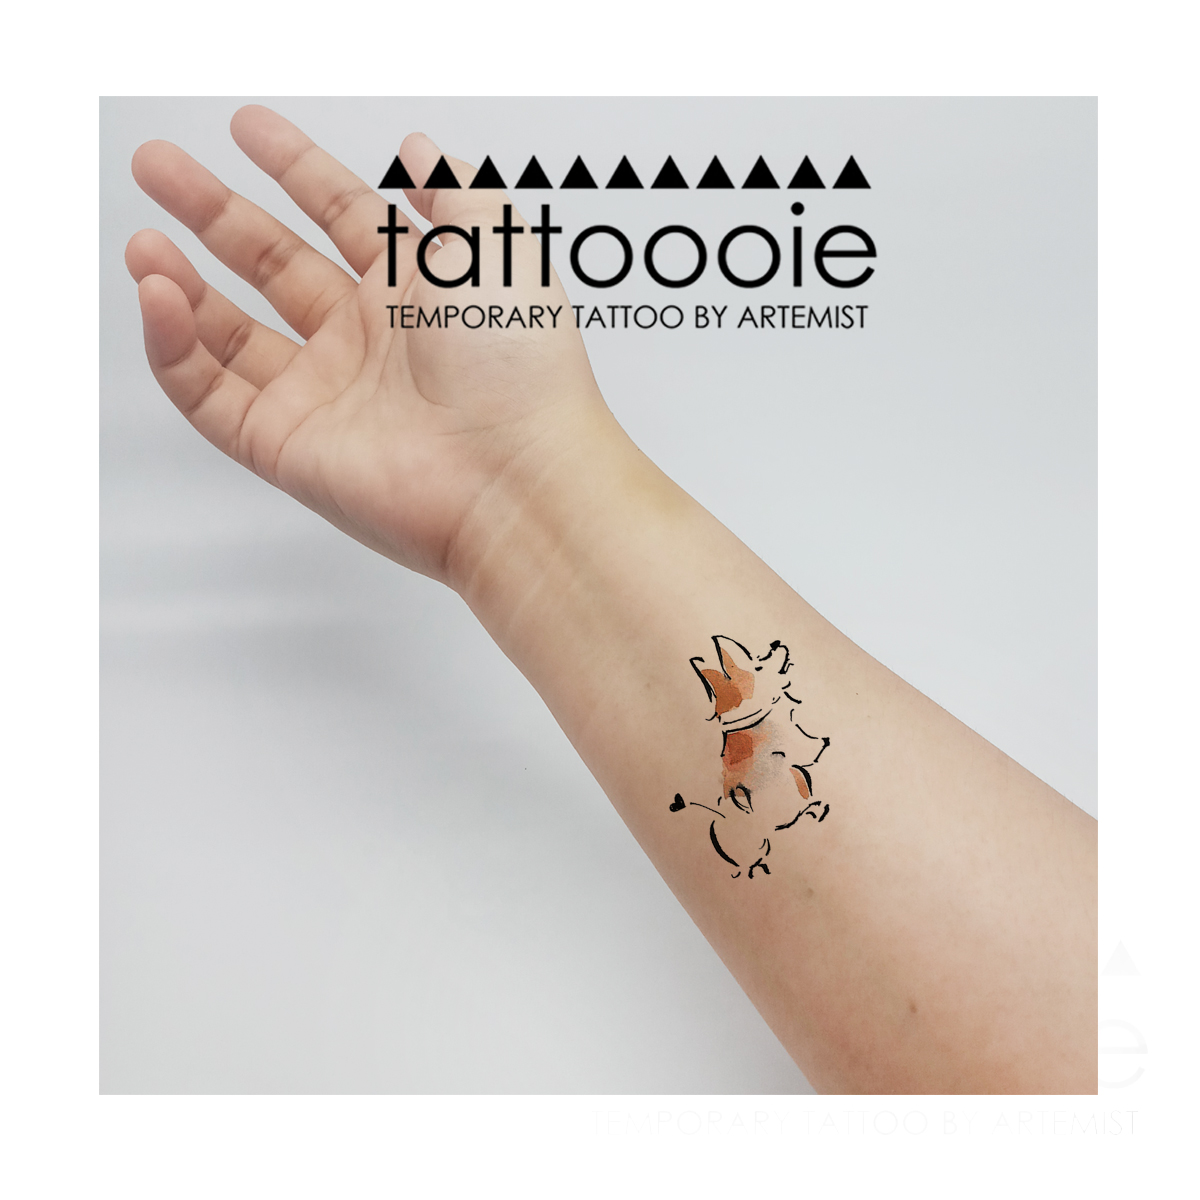 17 Tattoos Ideas For All The Low Key Corgi Stalkers  GirlStyle Singapore